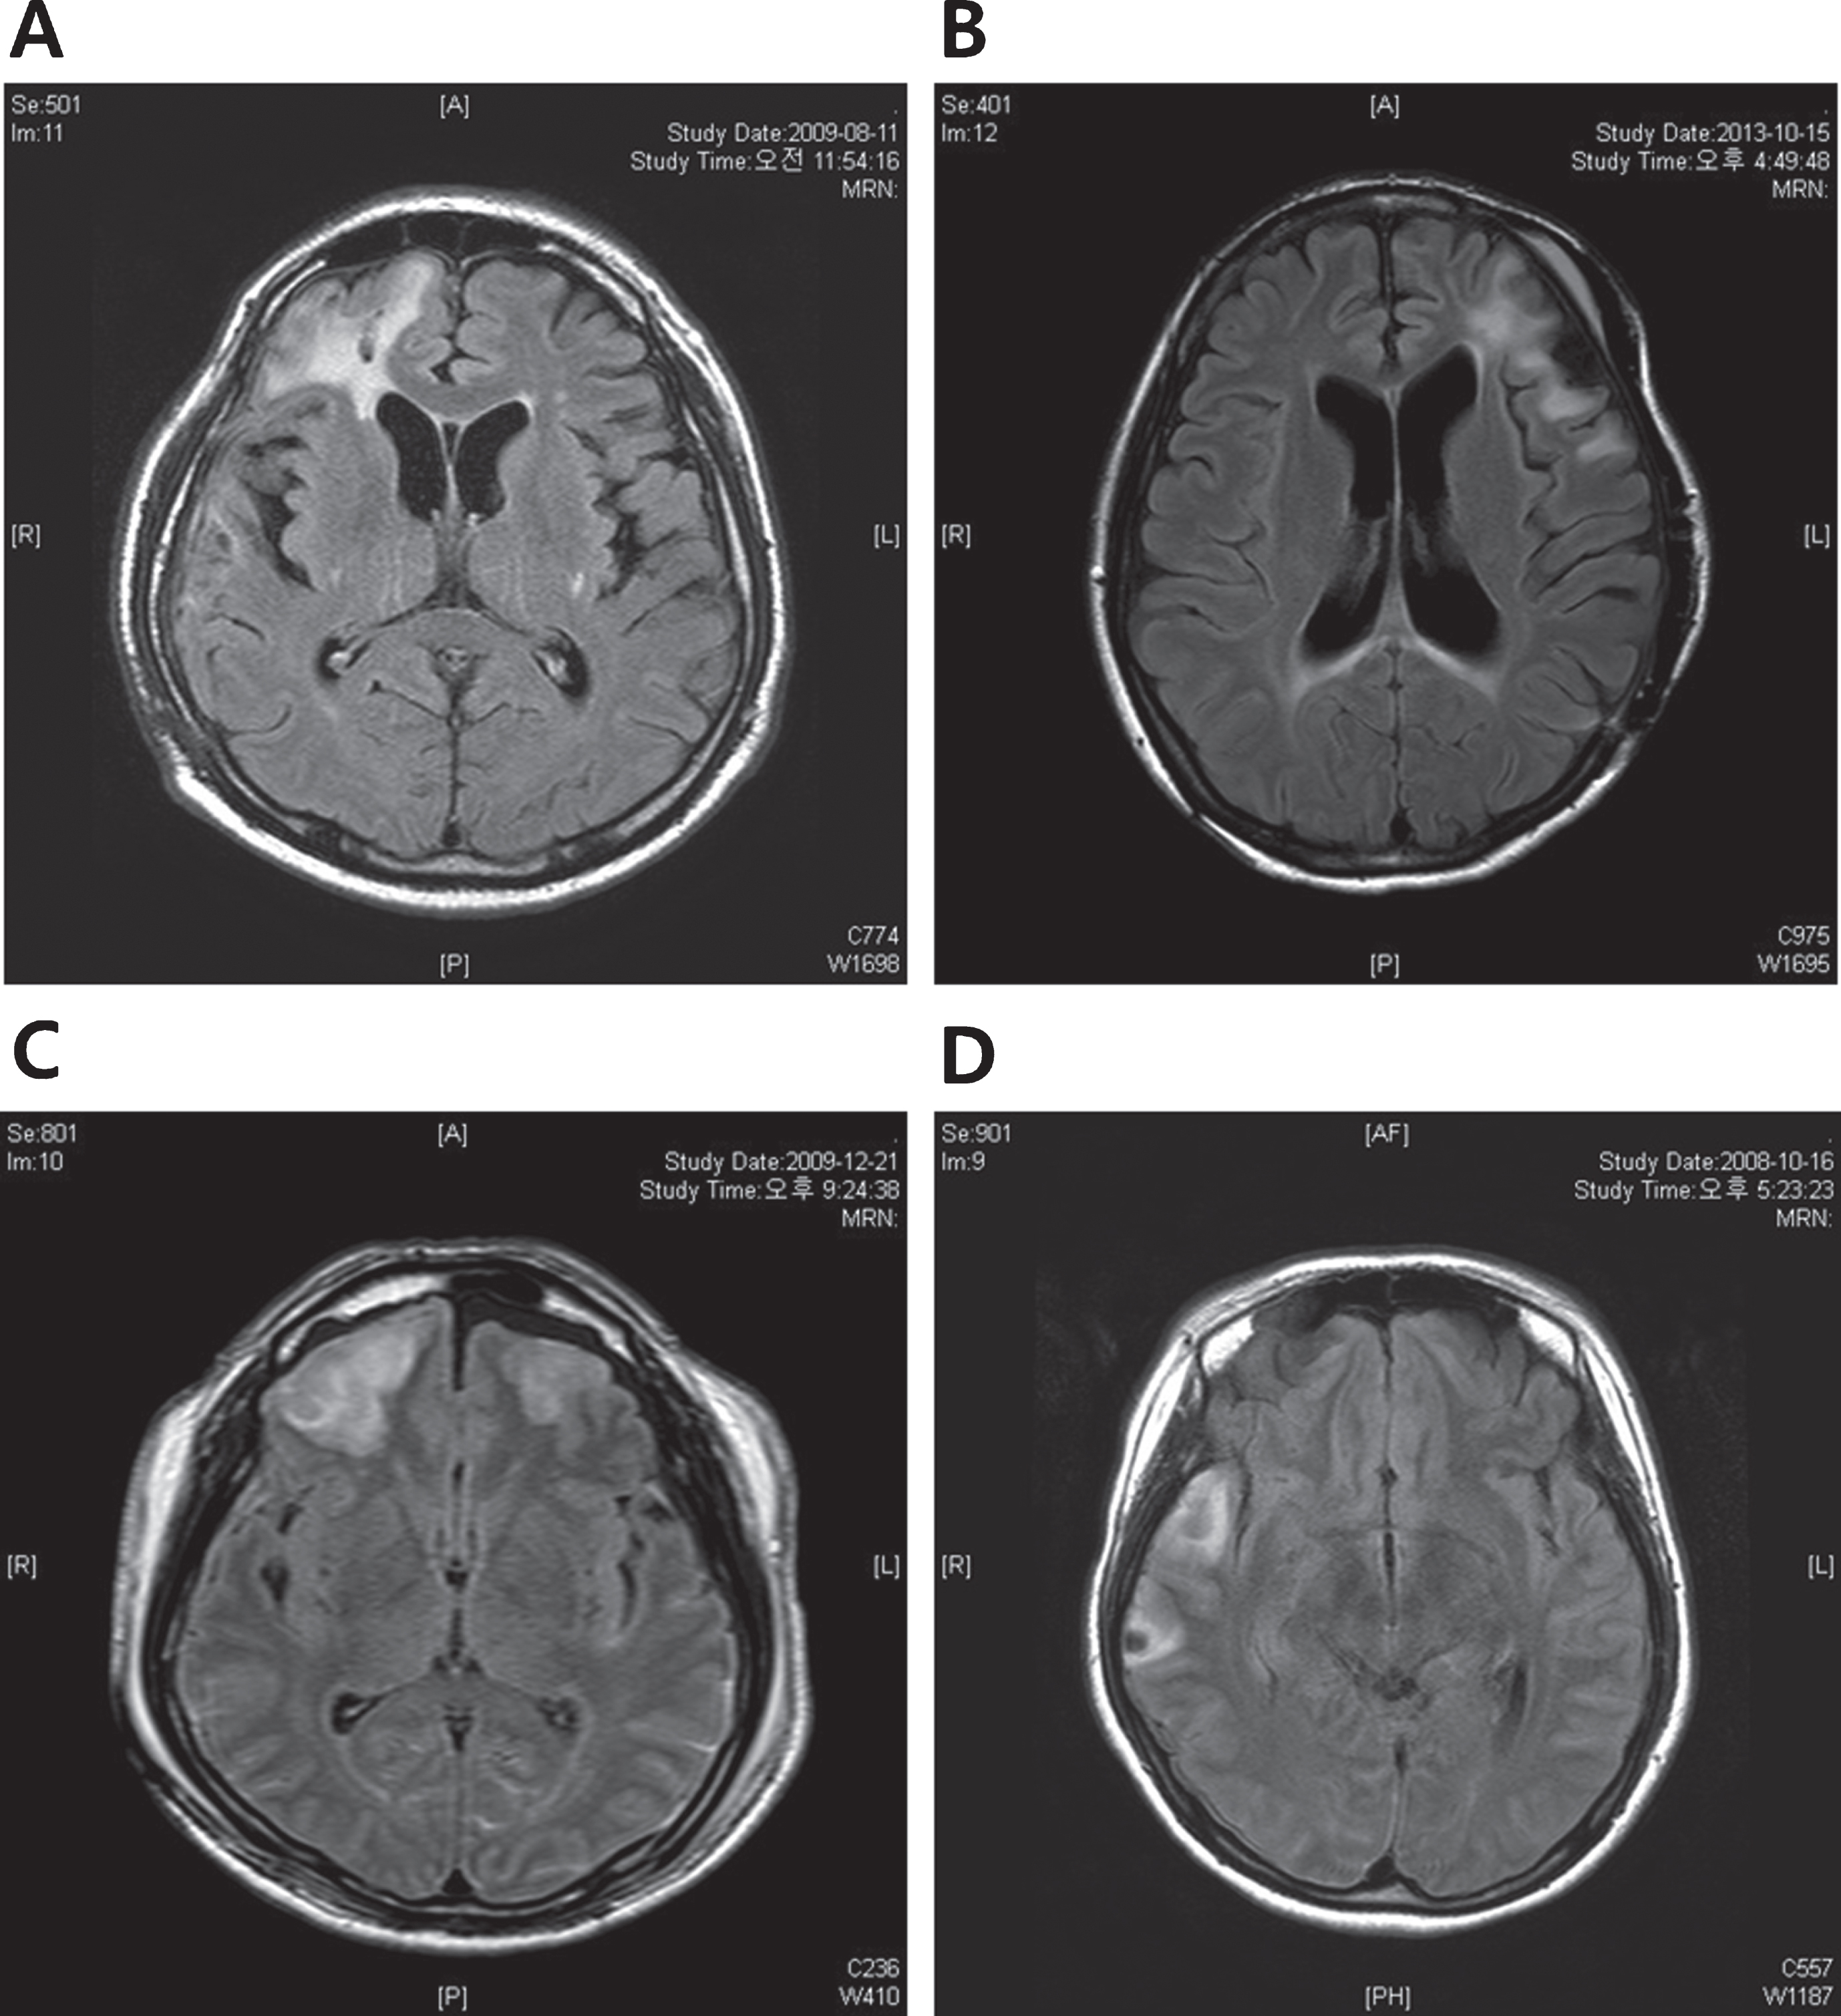 The representative MRI images of each TBI group. (A) Right frontal injury (B) Left frontal injury (C) Bilateral frontal injury (D) Non-frontal injury, Right temporal injury. MRI, Magnetic Resonance Imaging; TBI, Traumatic brain injury.